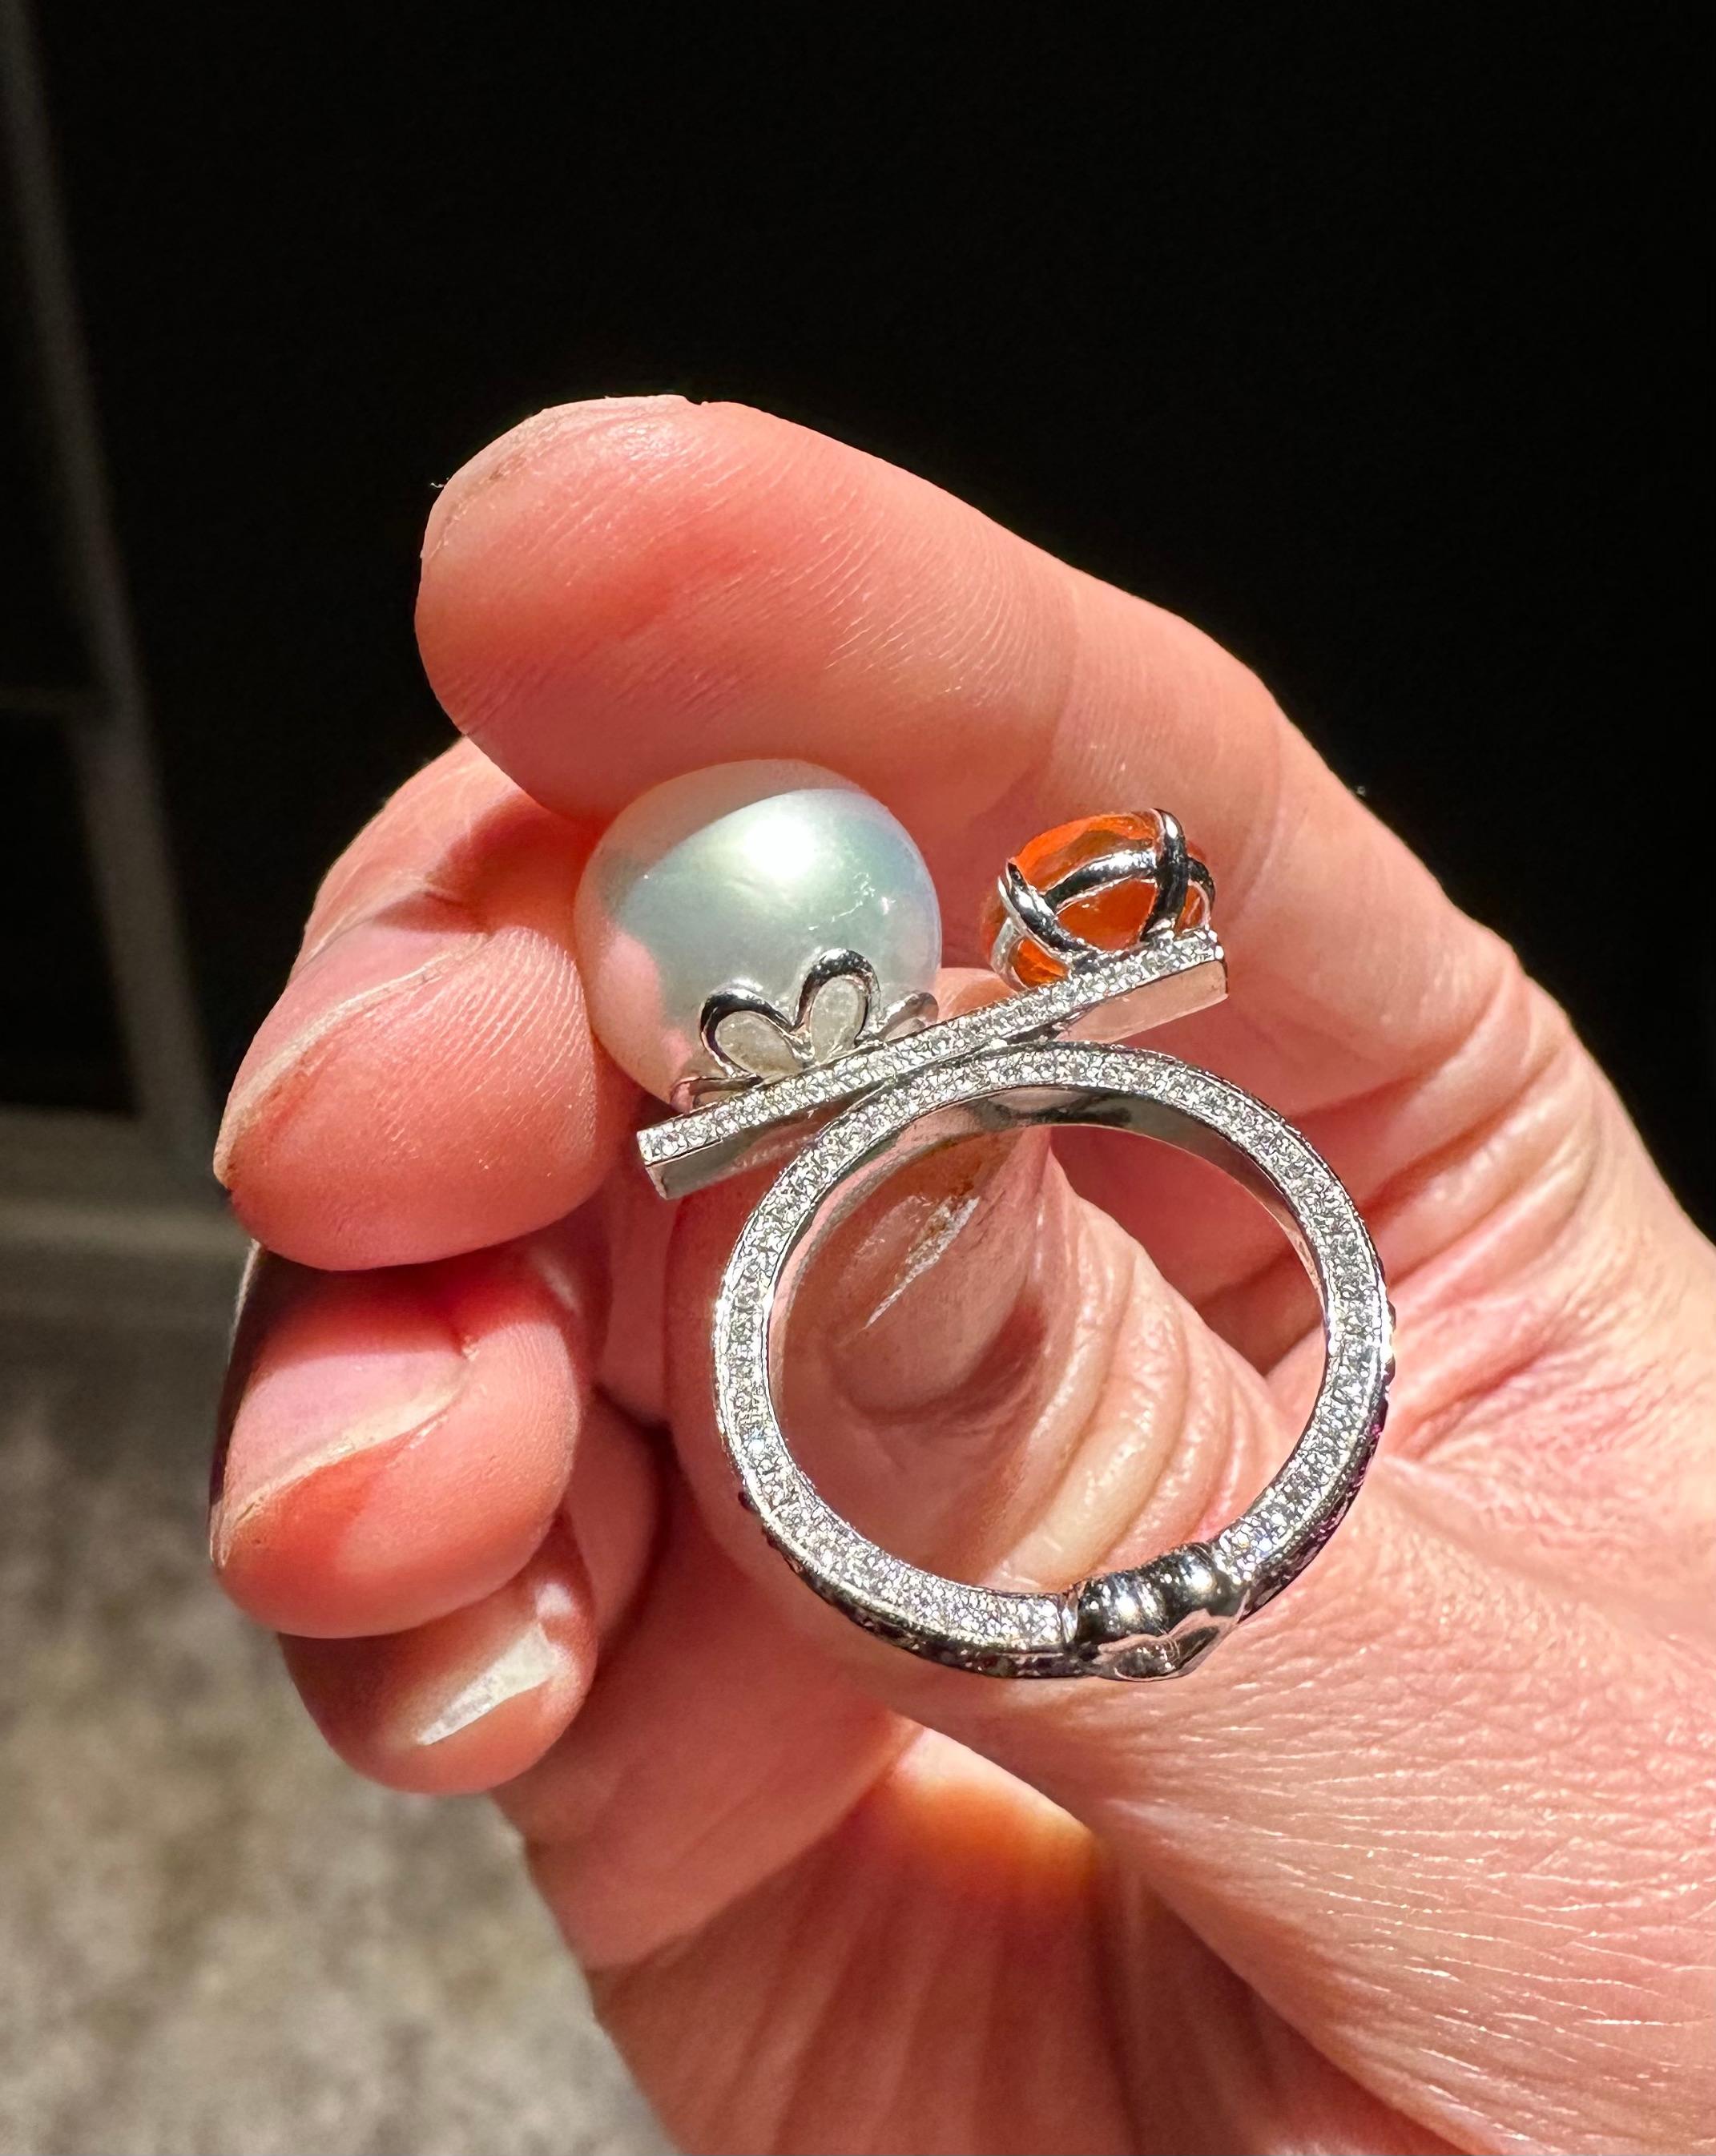 It is a very bold design with pearls and fire opal sitting at two ends of a scale. The surface of the ring is full of Diamonds and ruby pave except for the claws. It is a big and unique cocktail ring and would suit those who love a big loud ring. If